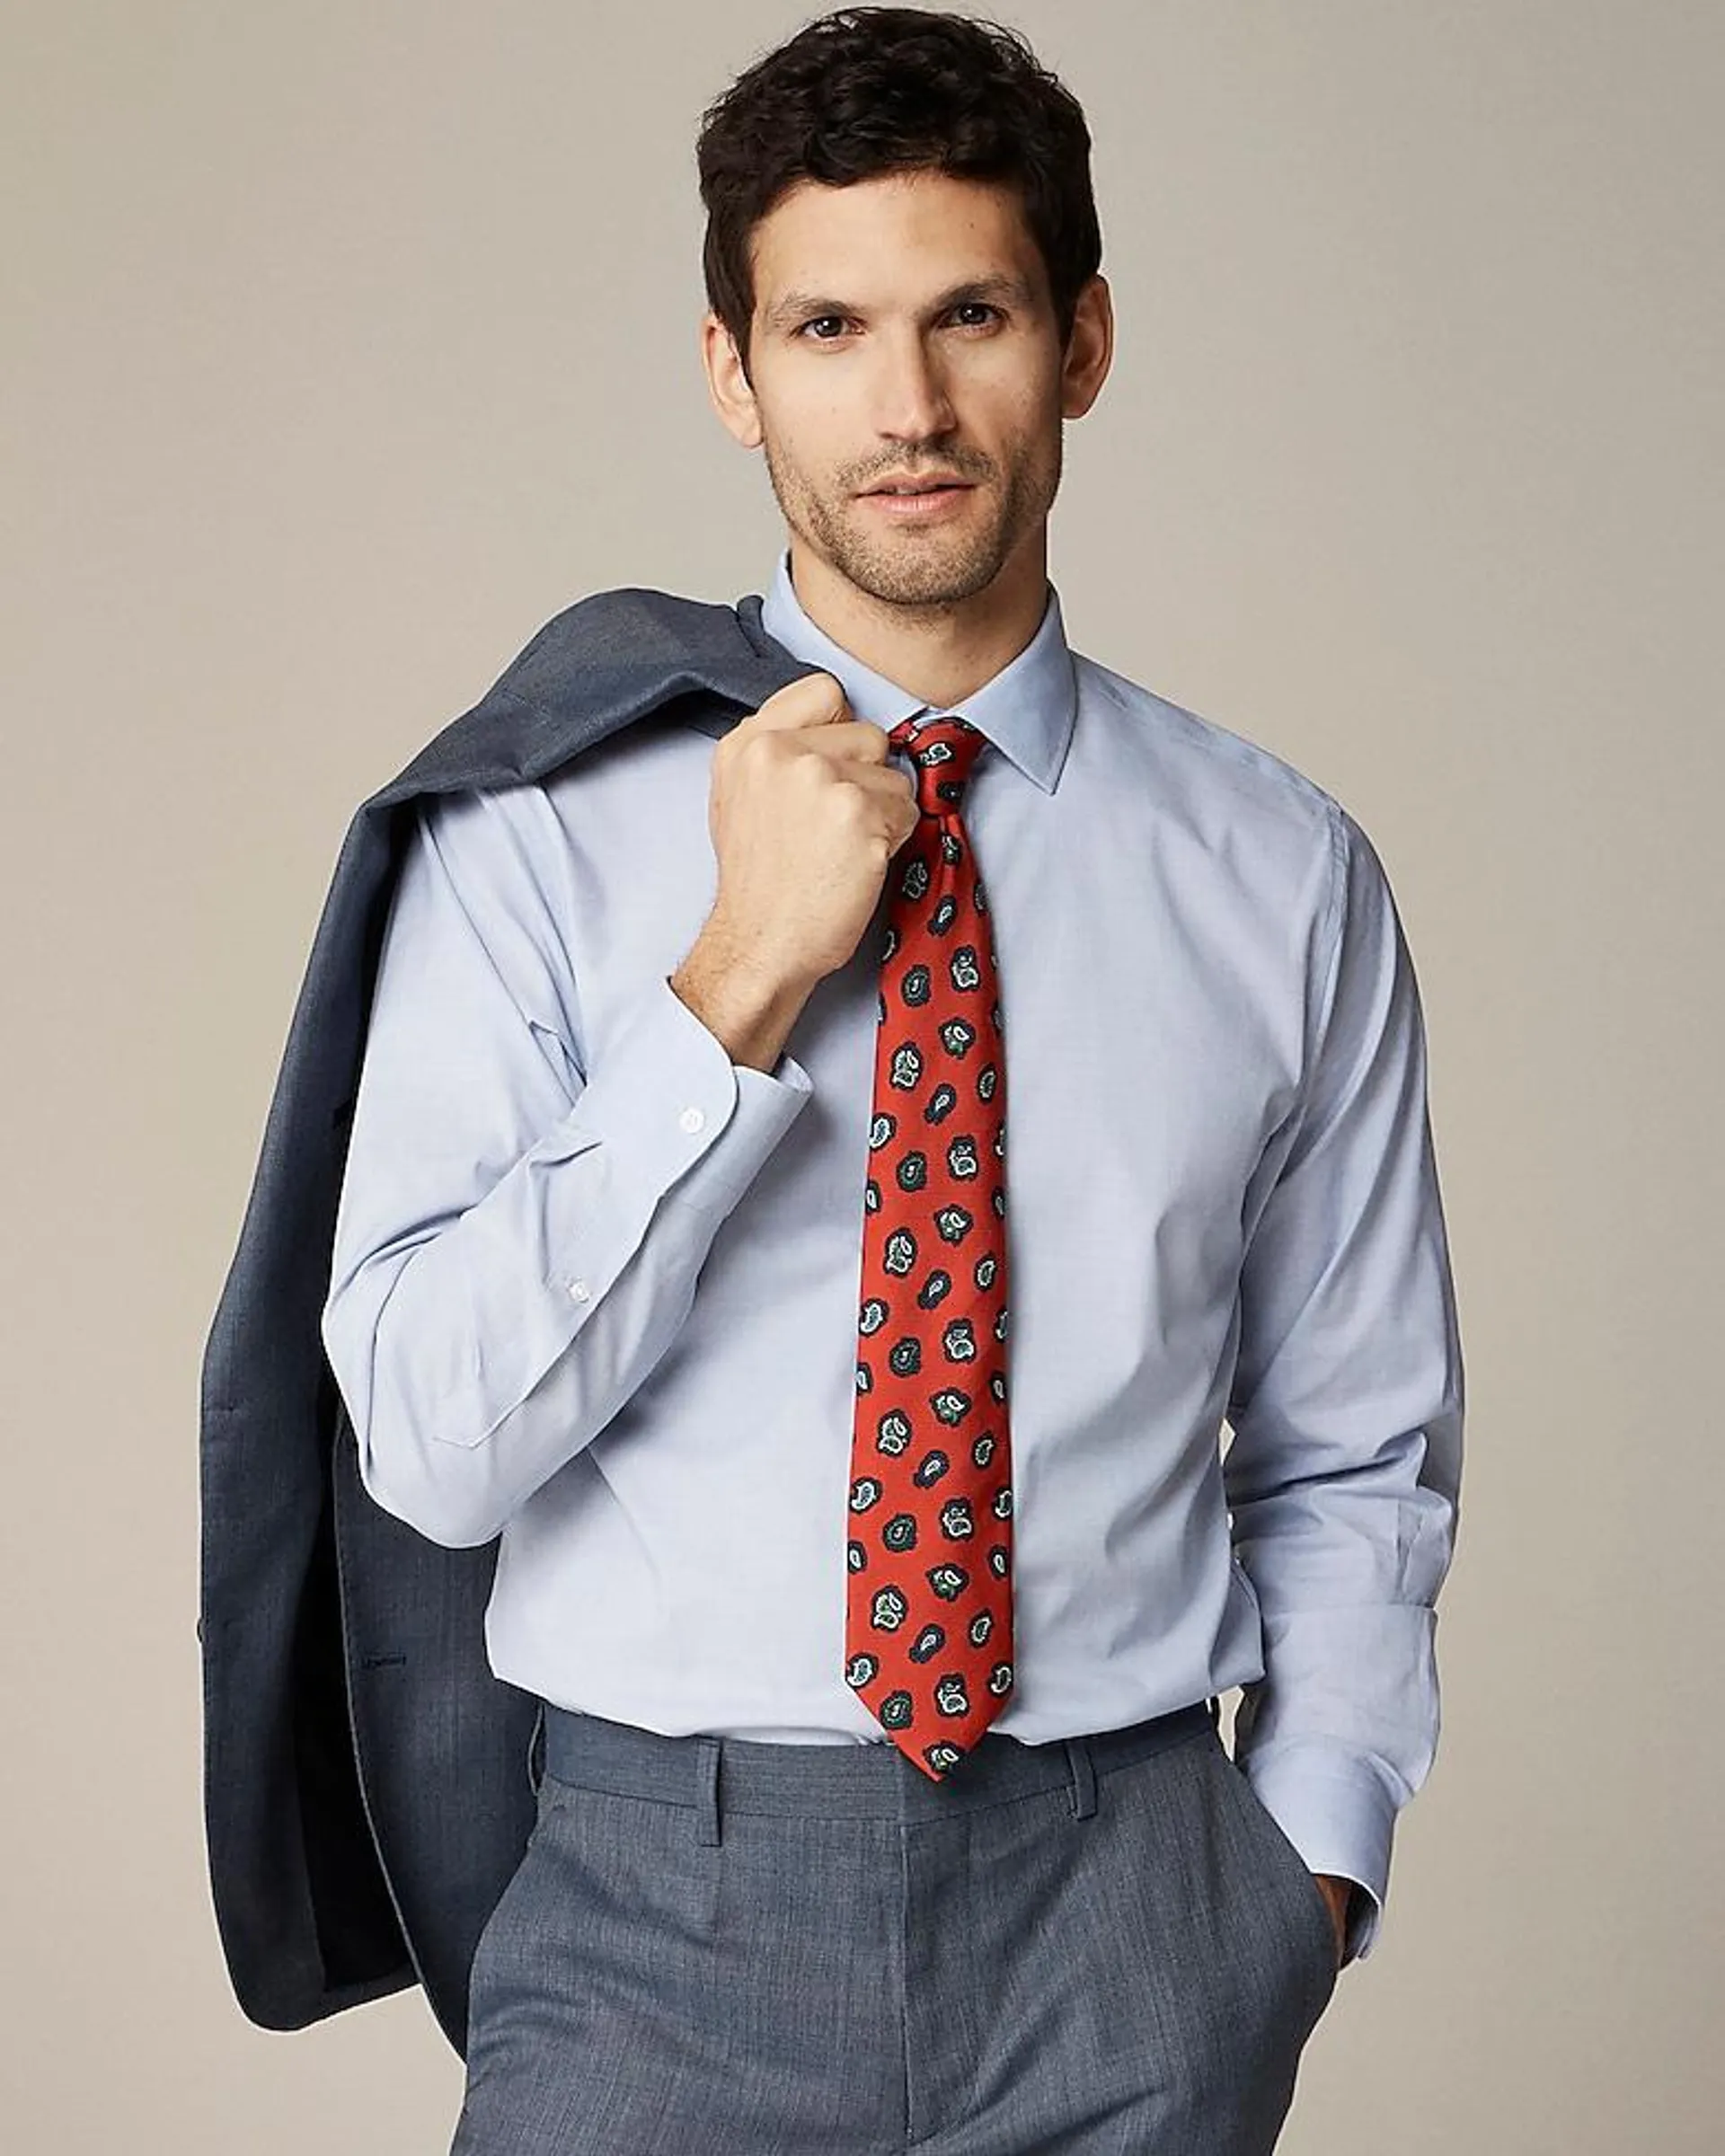 Bowery wrinkle-free dress shirt with spread collar